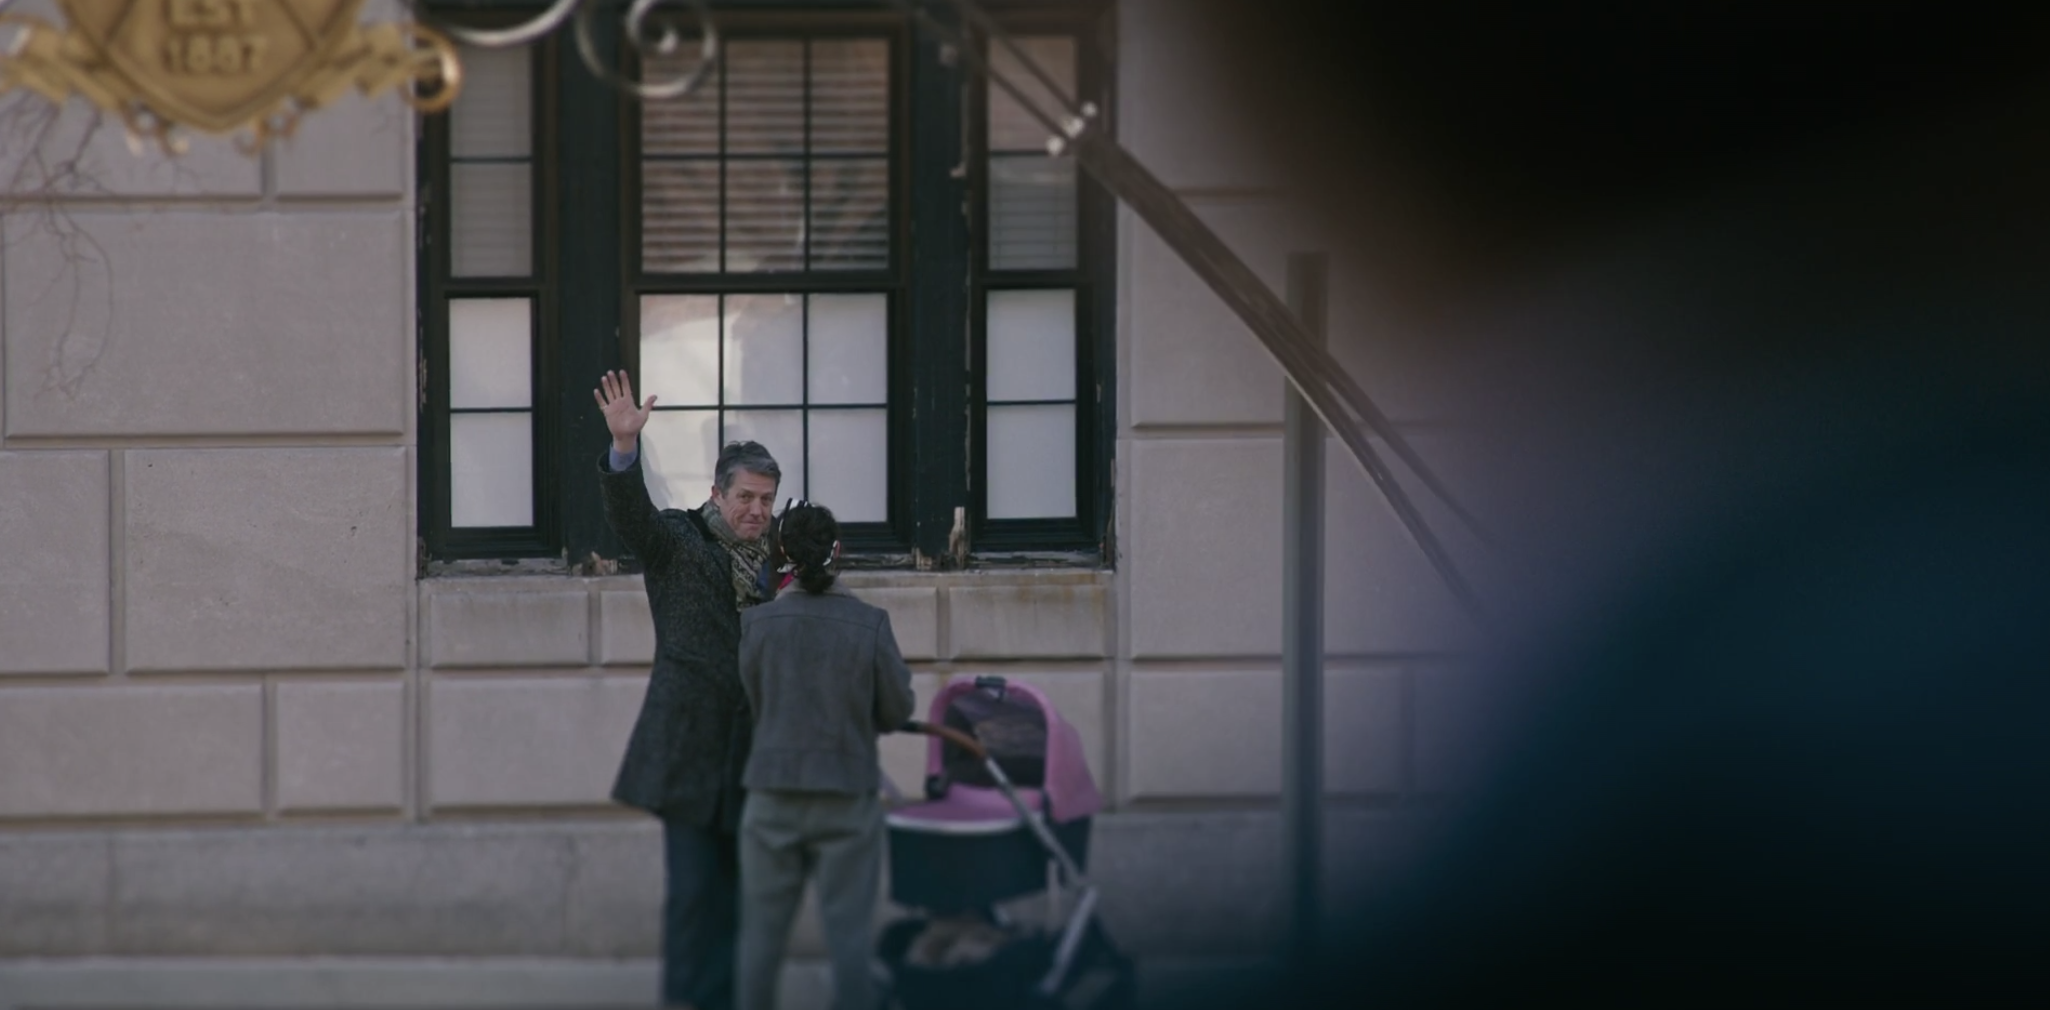 Jonathan waving to Henry while speaking to Elena.